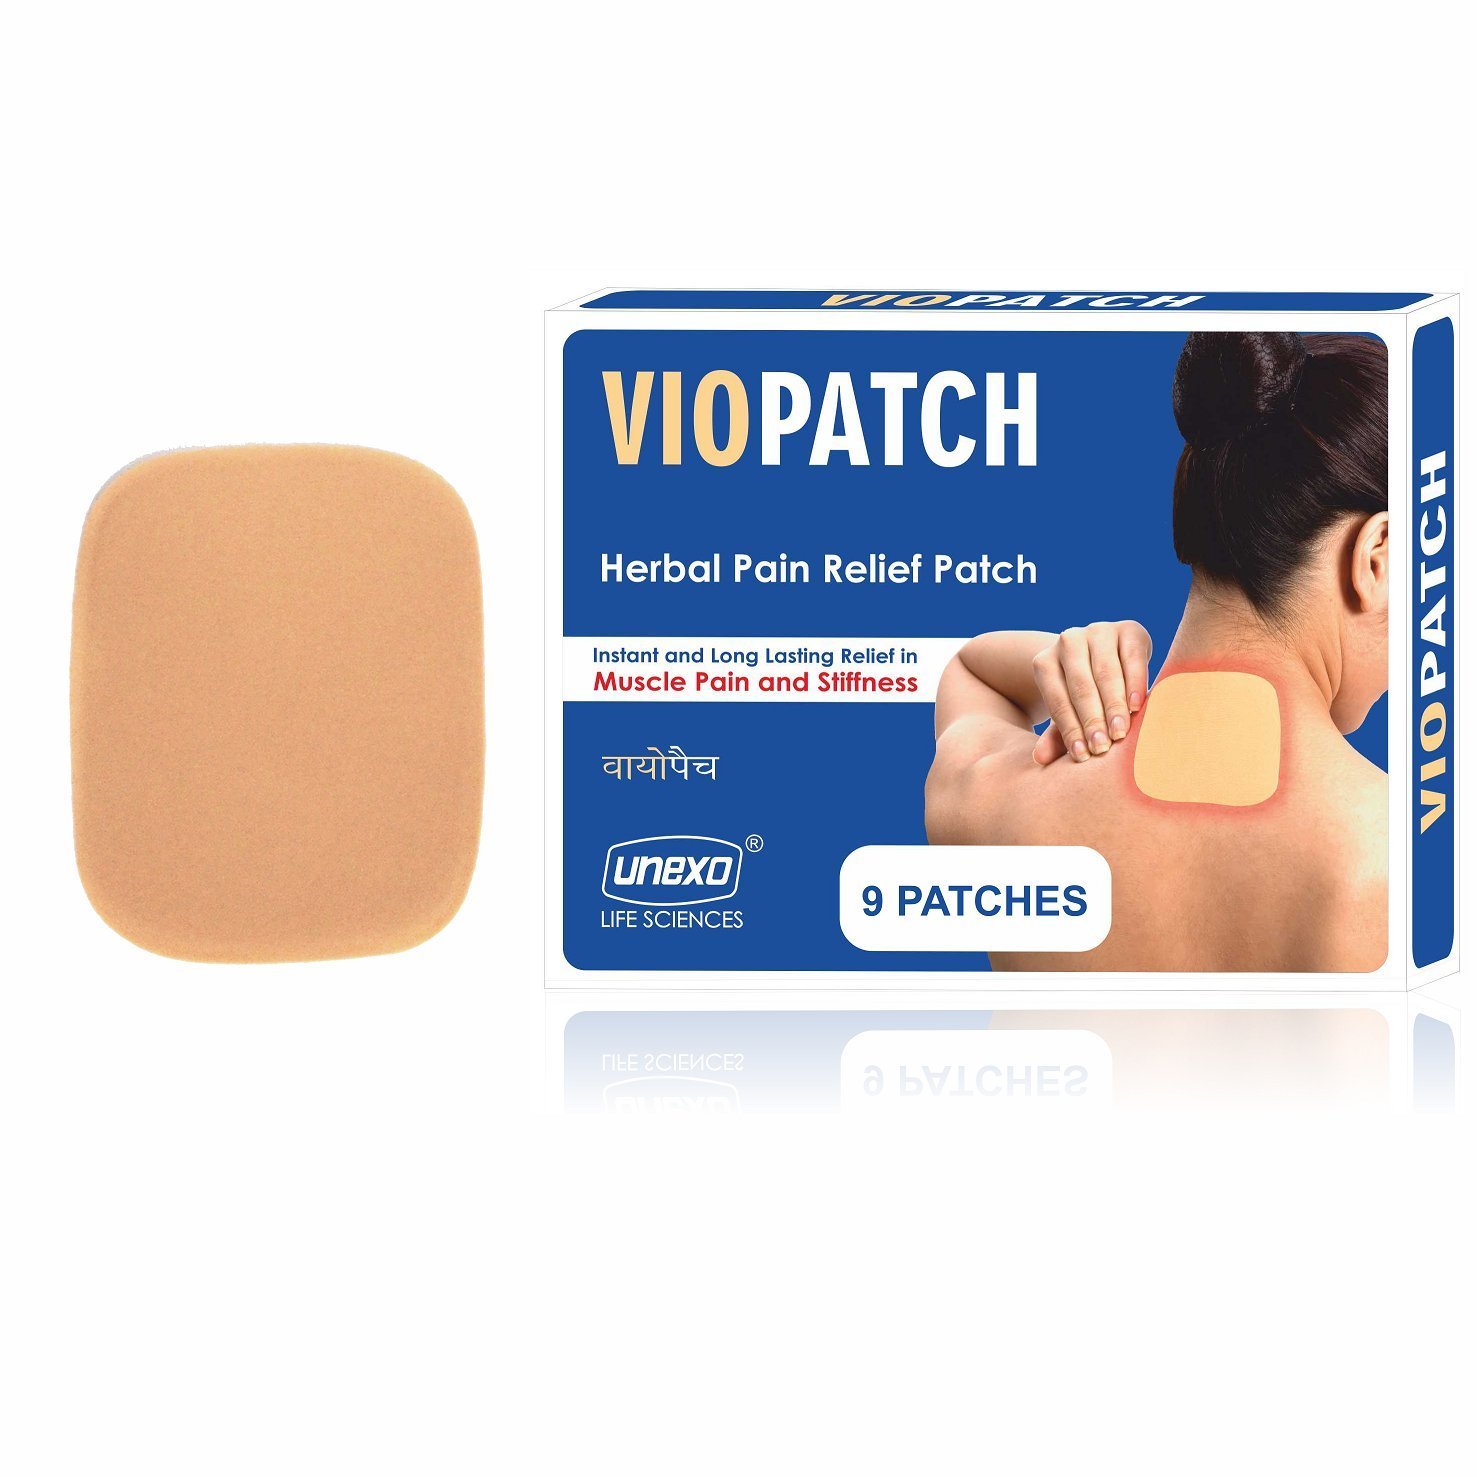 Viopatch Pain Relief Patch - 9 Patches Price in India